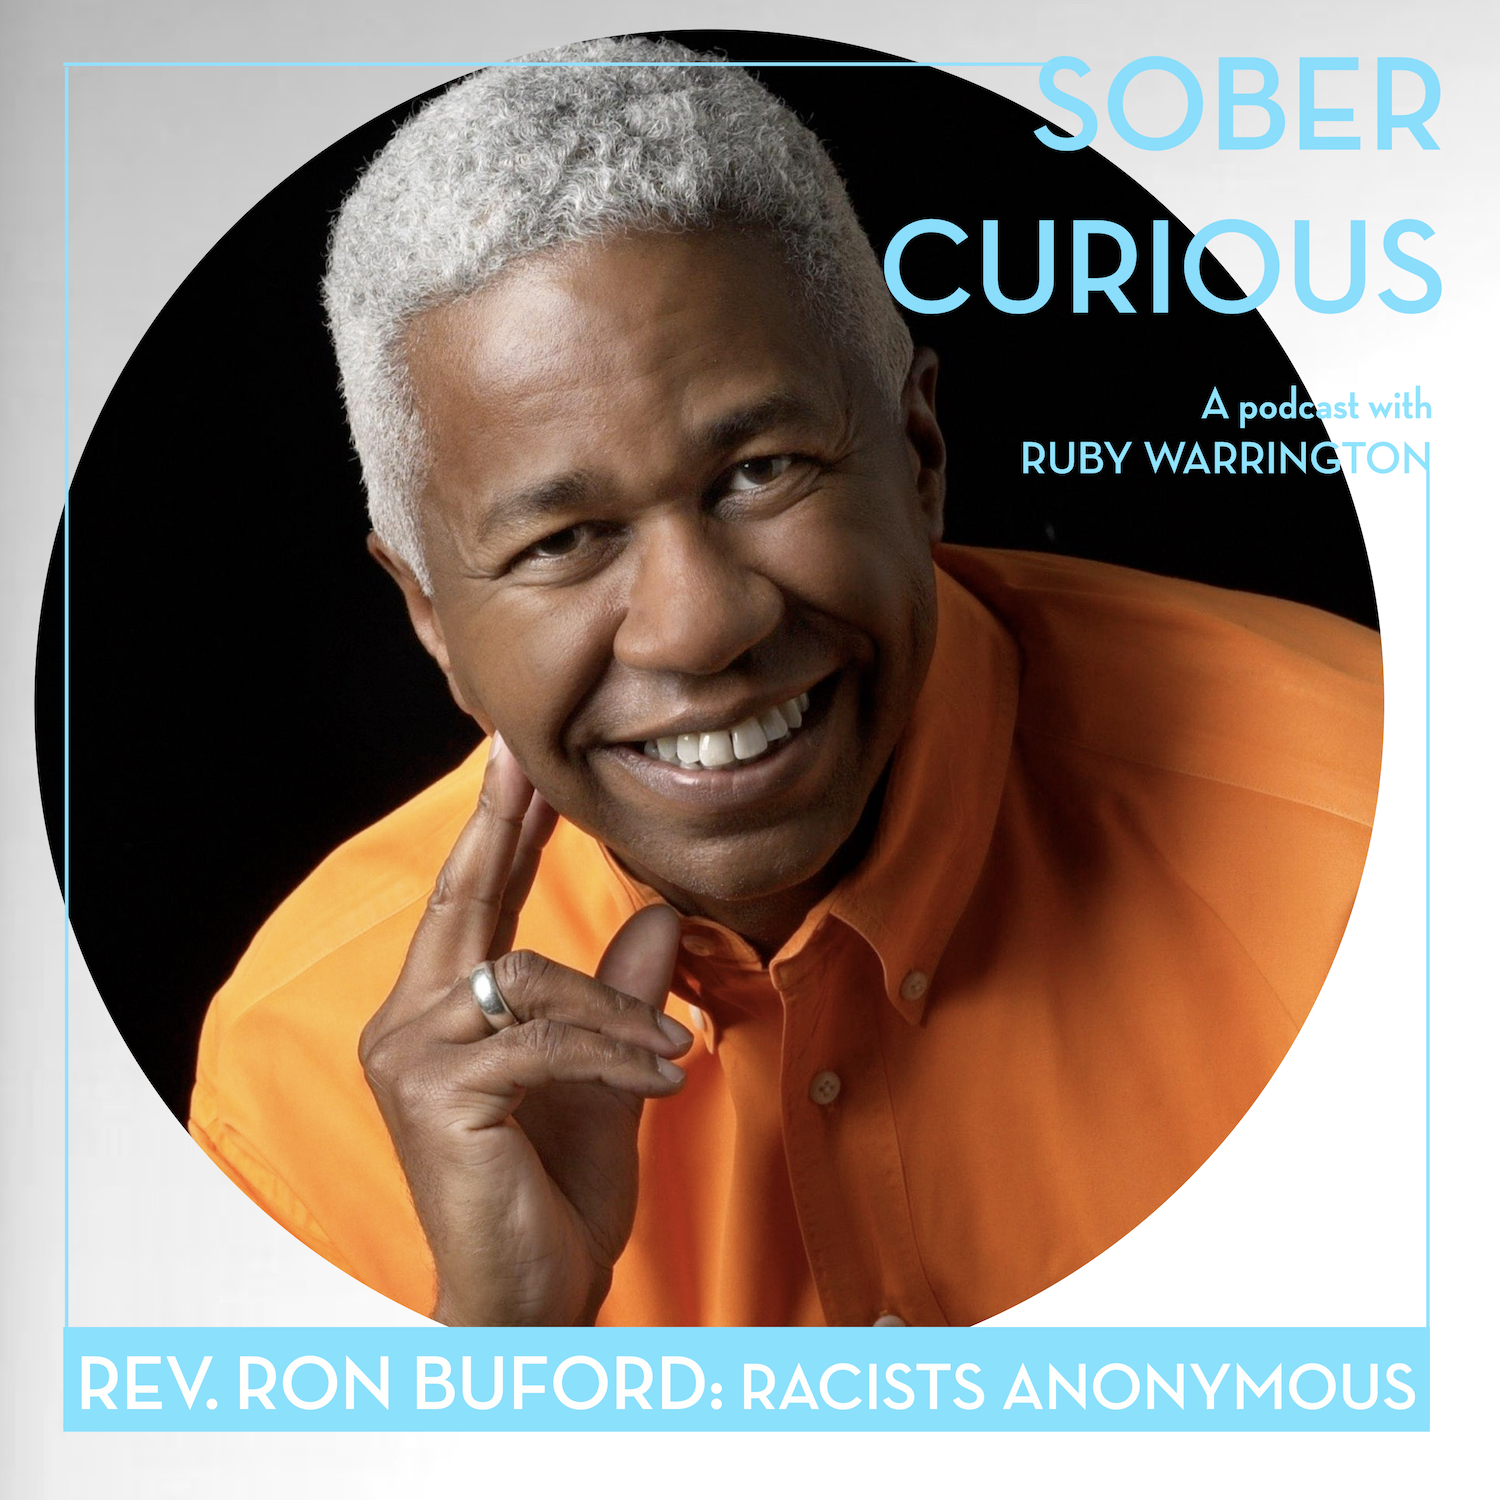 racists anonymous rev ron buford sober curious podcast ruby warrington